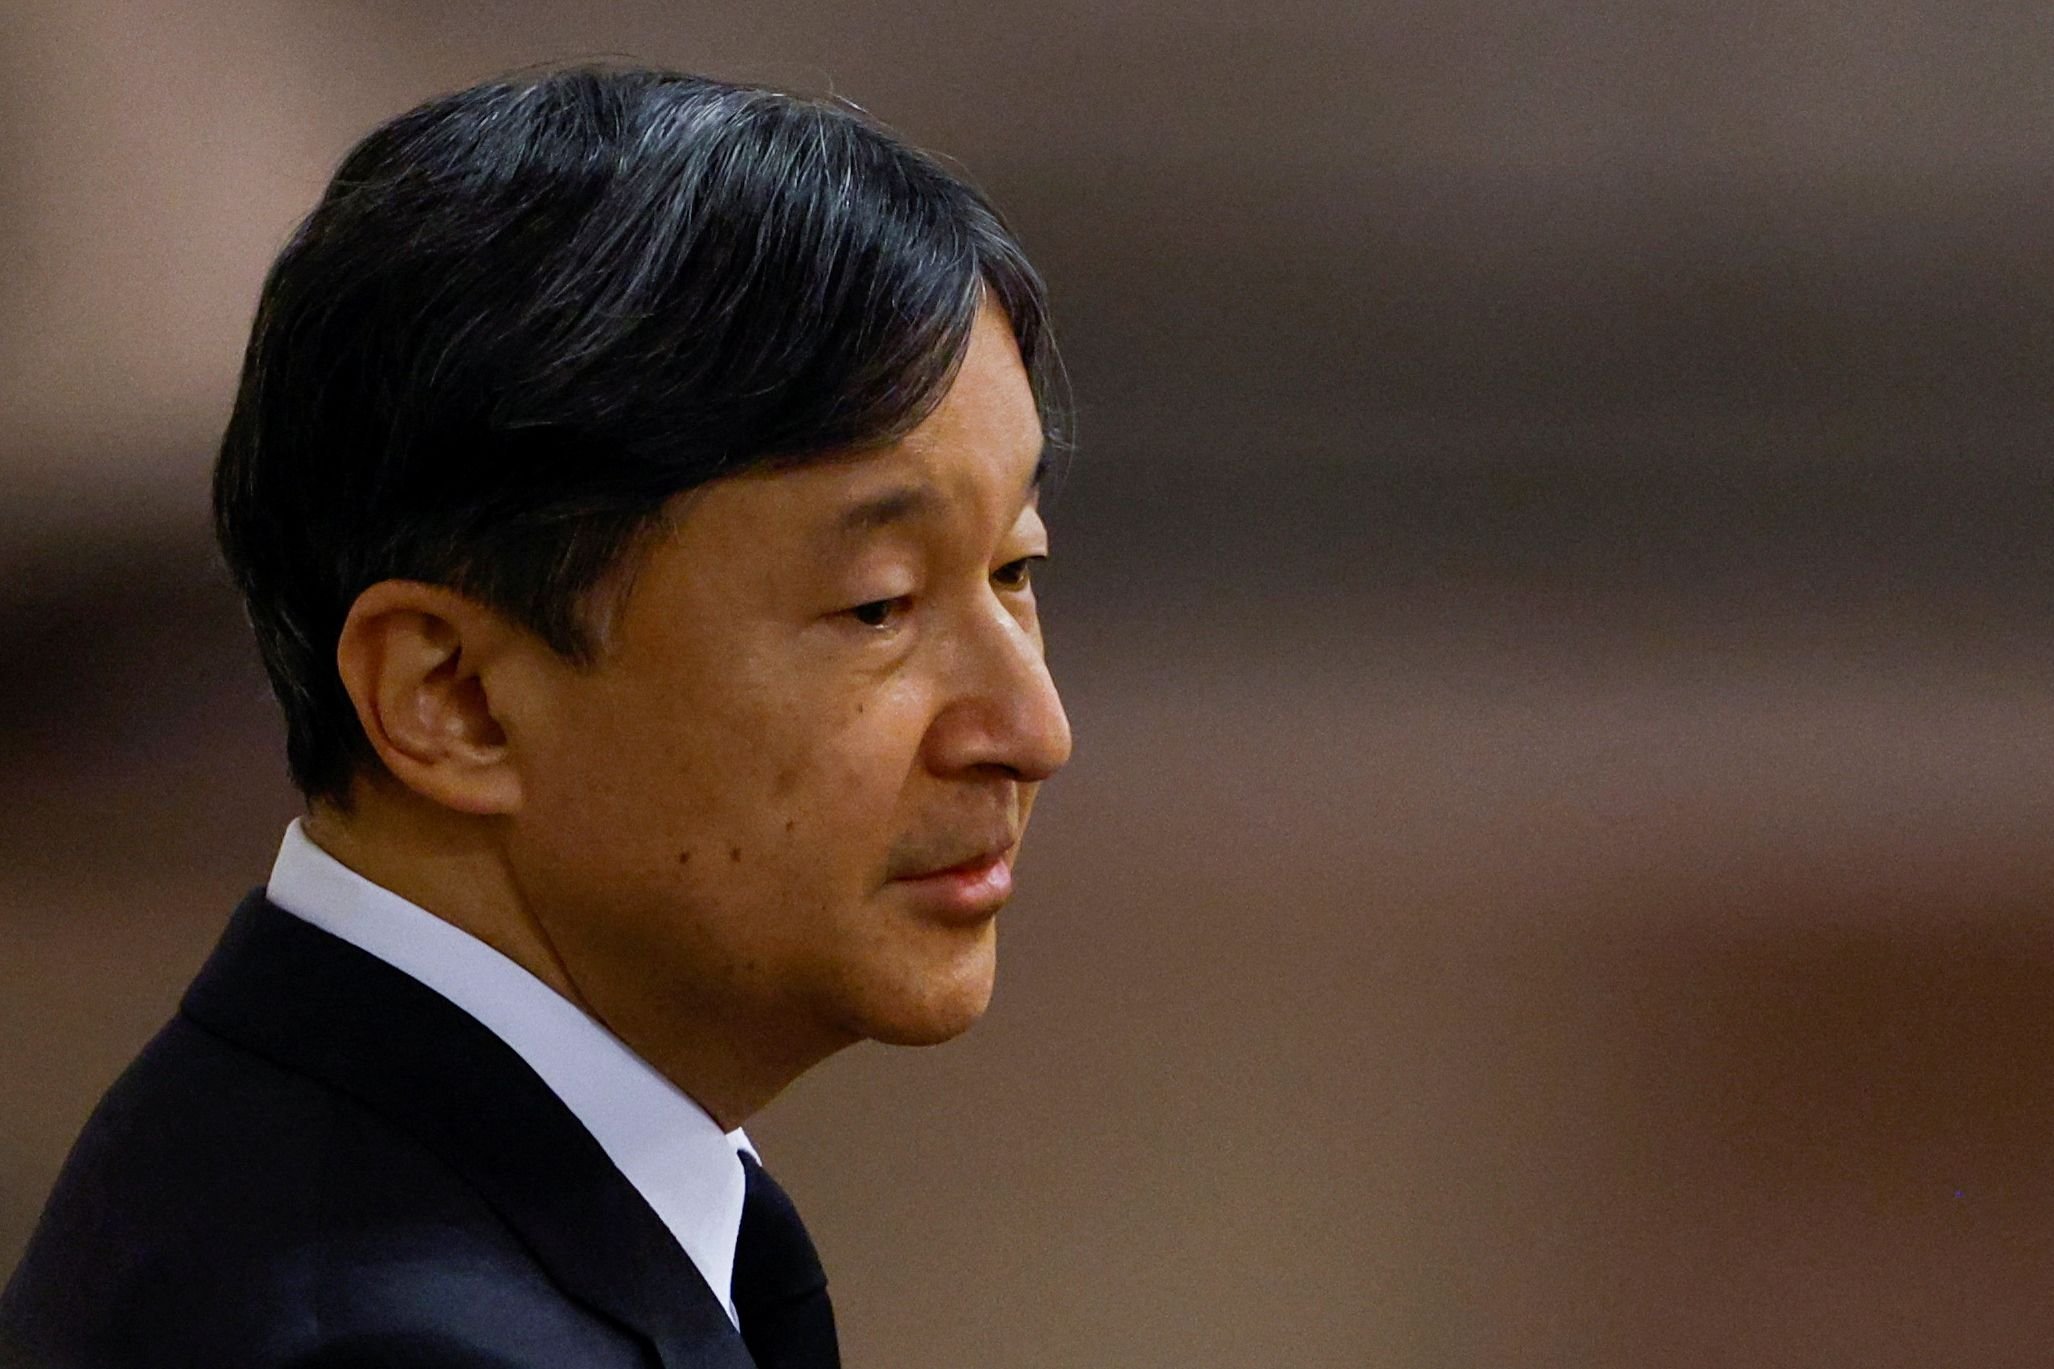 Japan's Emperor Naruhito pays his respects at the coffin of Queen Elizabeth II, Lying in State inside Westminster Hall, at the Palace of Westminster in London on September 18, 2022. - Queen Elizabeth II will lie in state in Westminster Hall inside the Palace of Westminster, until 0530 GMT on September 19, a few hours before her funeral, with huge queues expected to file past her coffin to pay their respects. (Photo by JOHN SIBLEY / POOL / AFP)